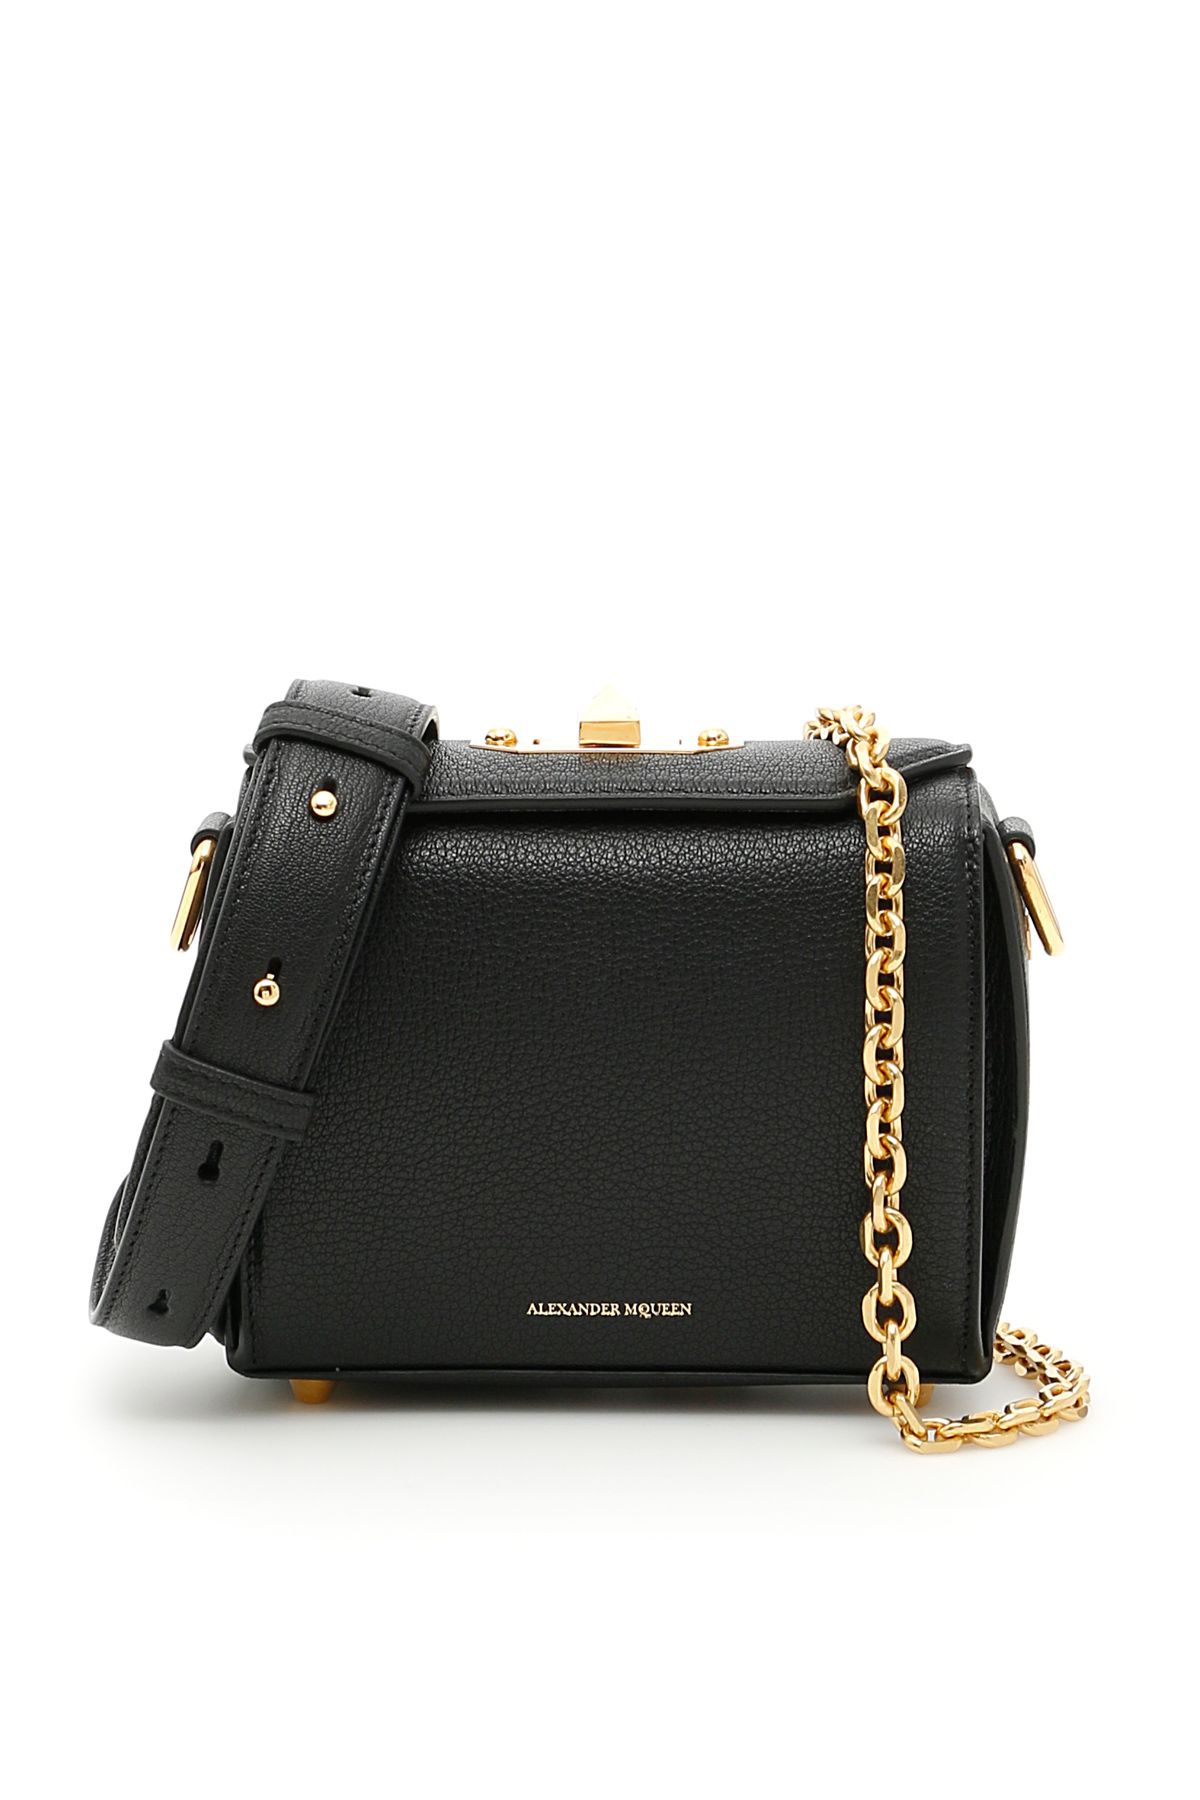 Alexander McQueen - Box Bag 16 | ABOUT ICONS